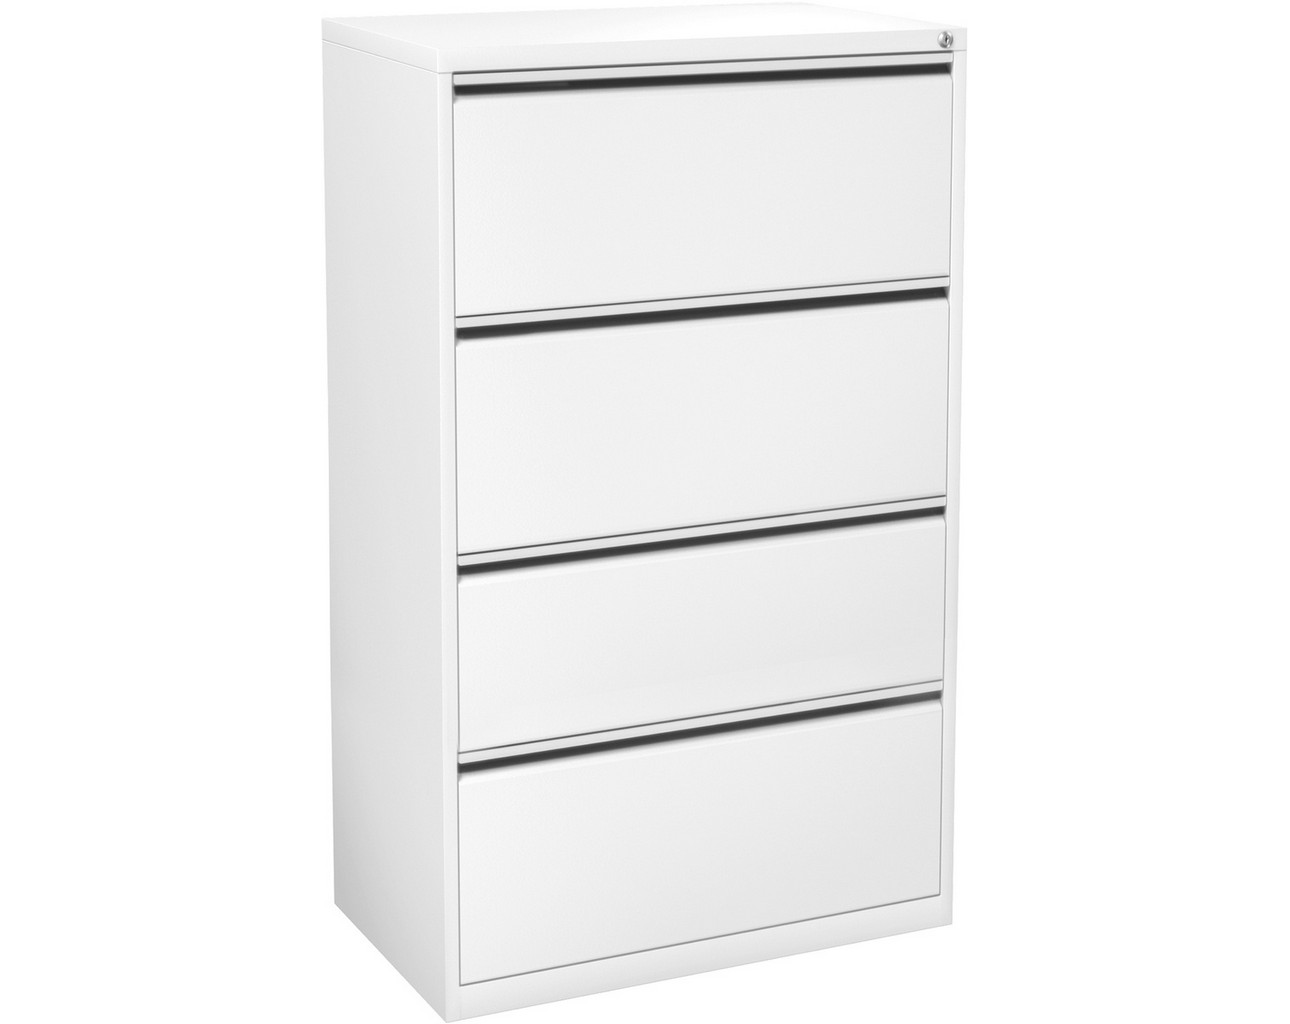 Steelwise Lateral Filing Cabinet – 4 Drawer in White